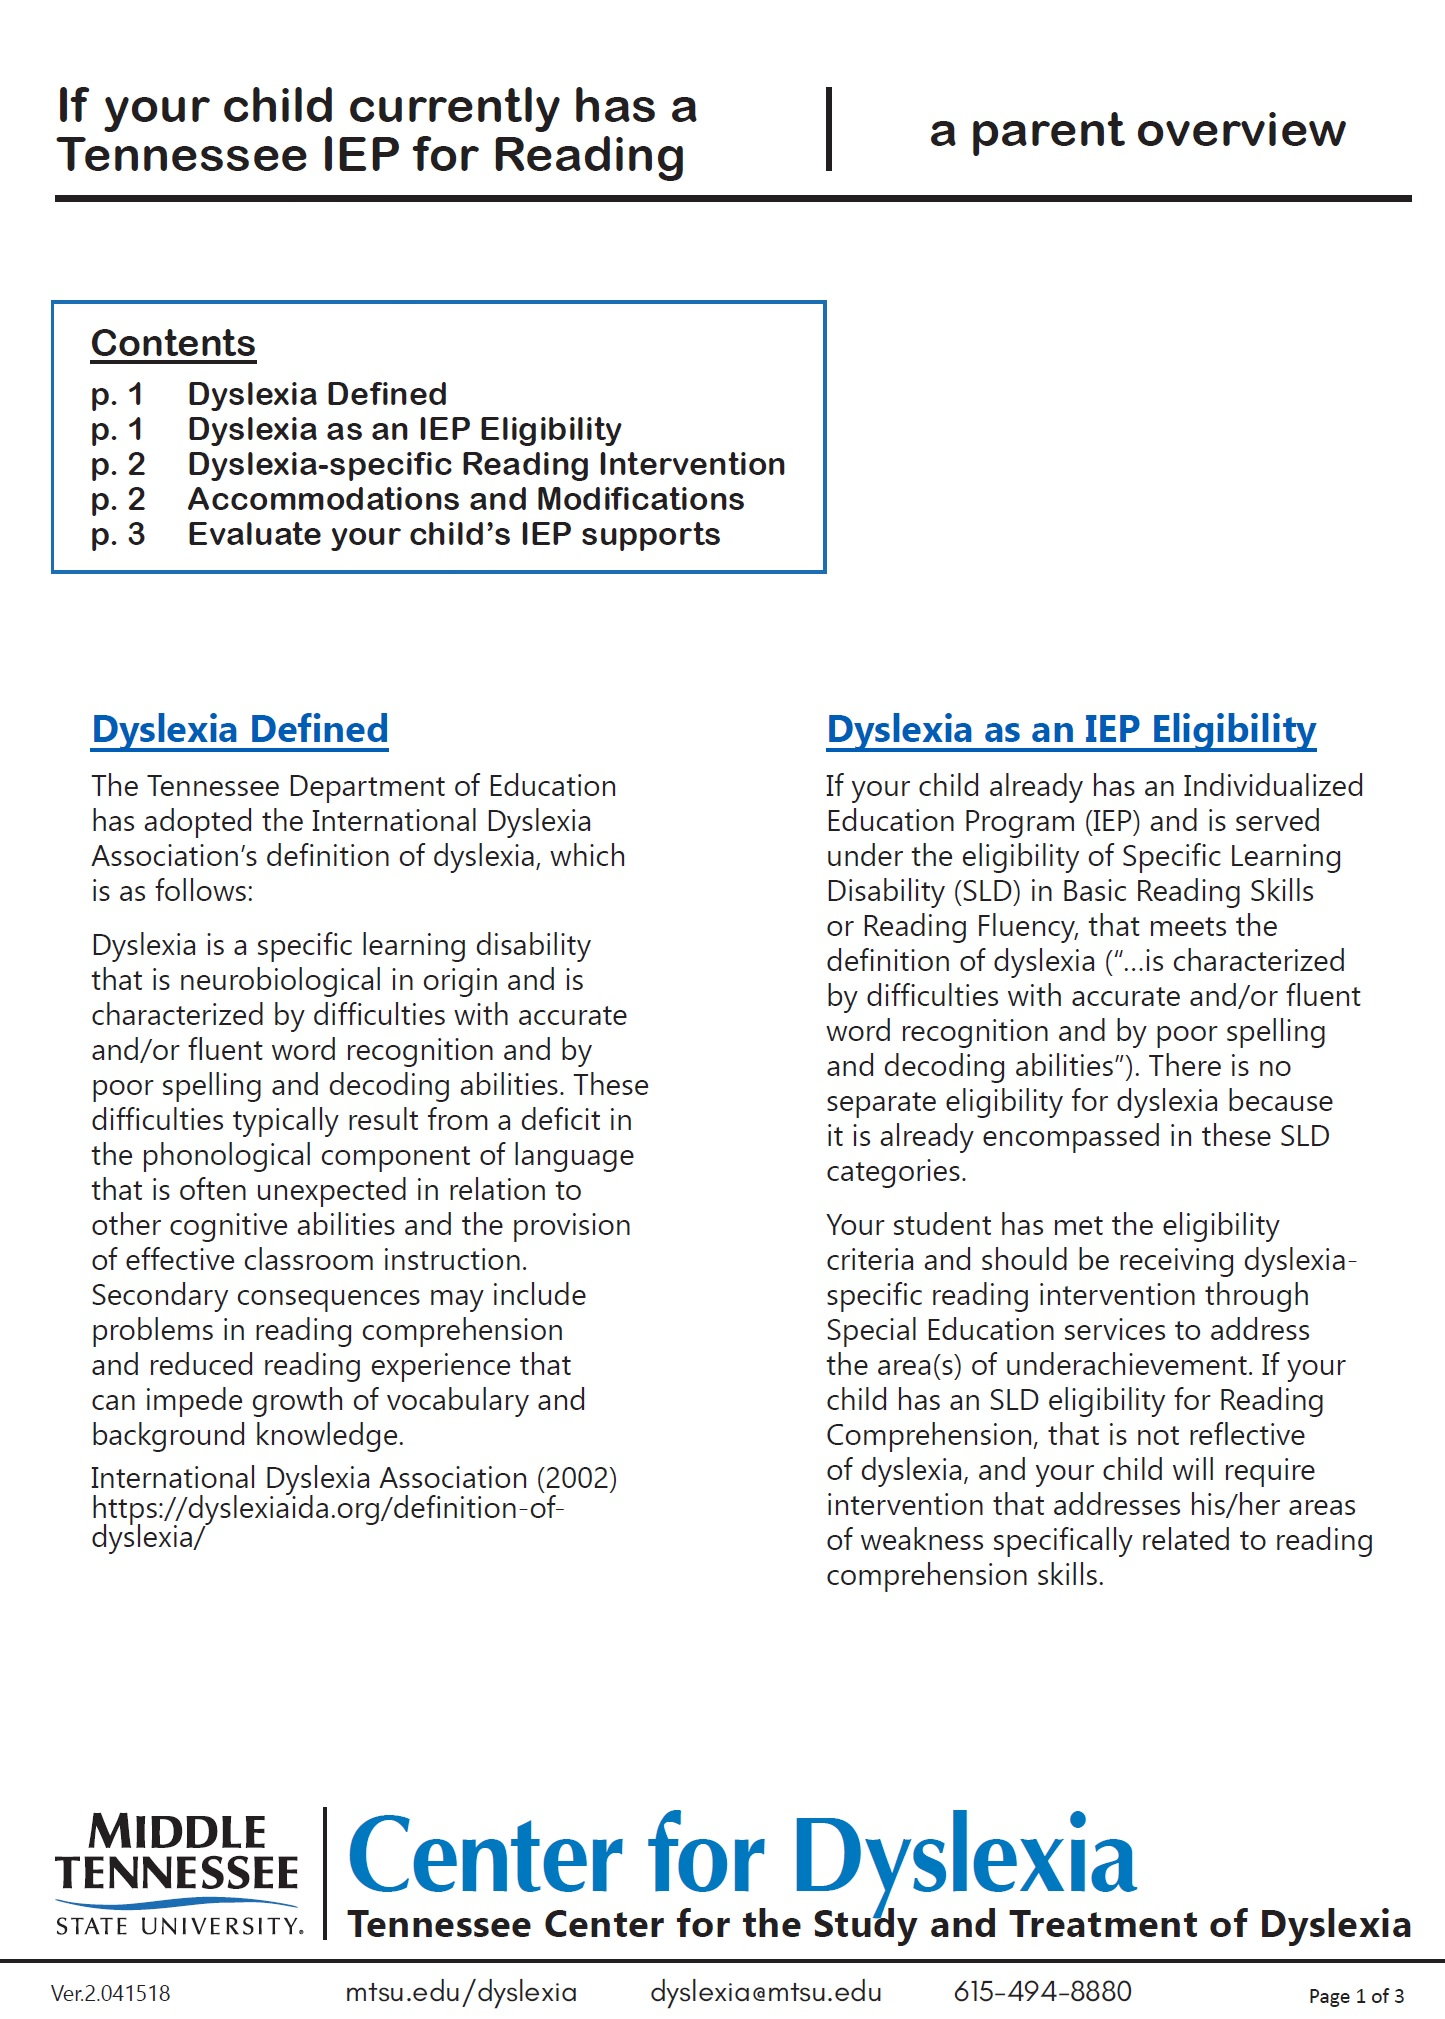 How Dyslexia Fits within a Current IEP for Reading Cover Image